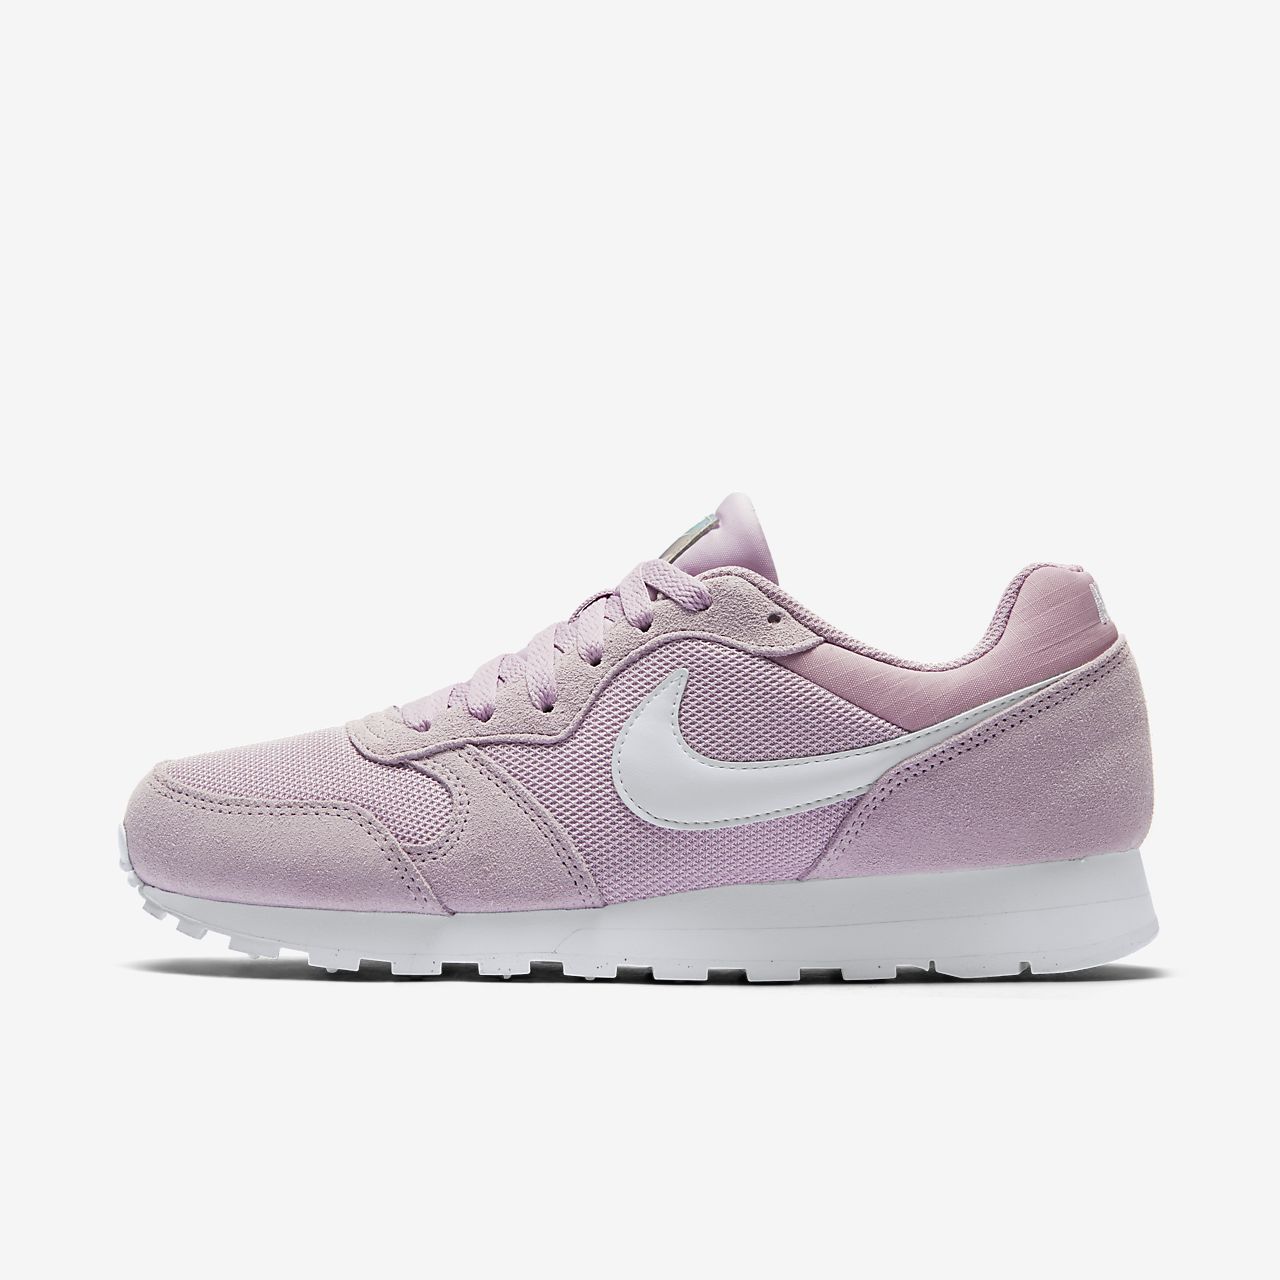 nike runner 2 women's buy clothes shoes 